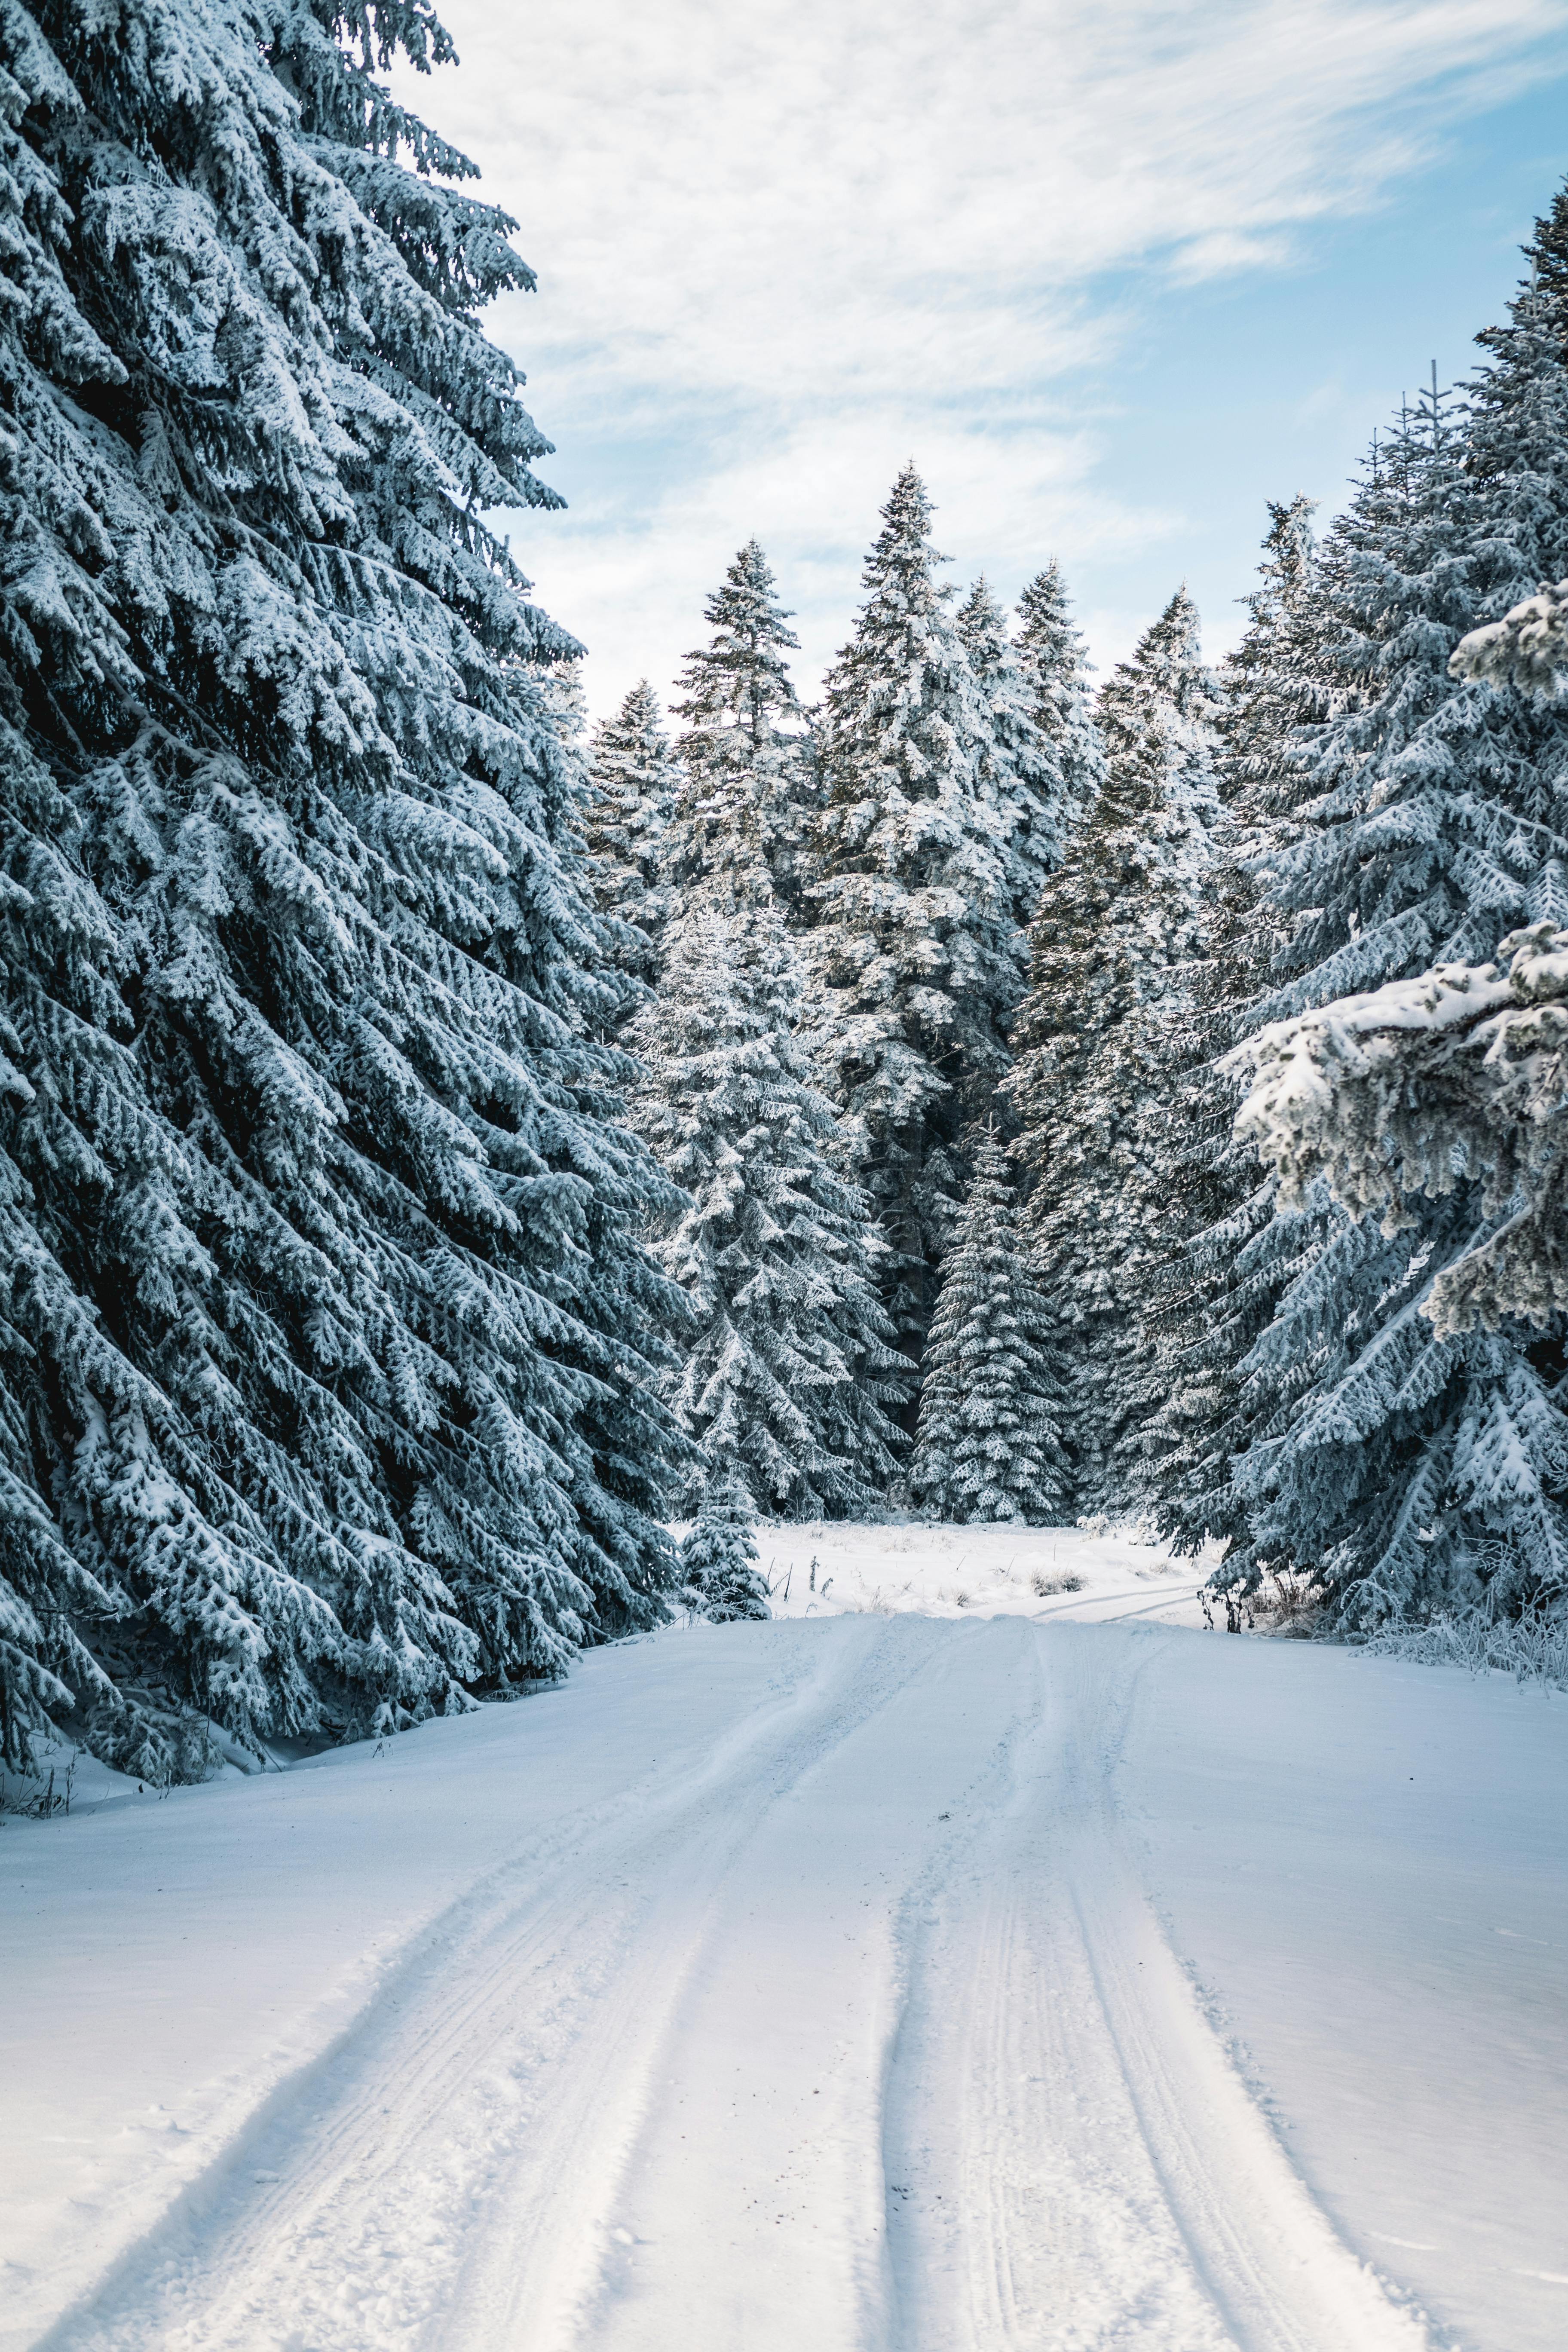 190+ Free Winter Stock Photos & Images